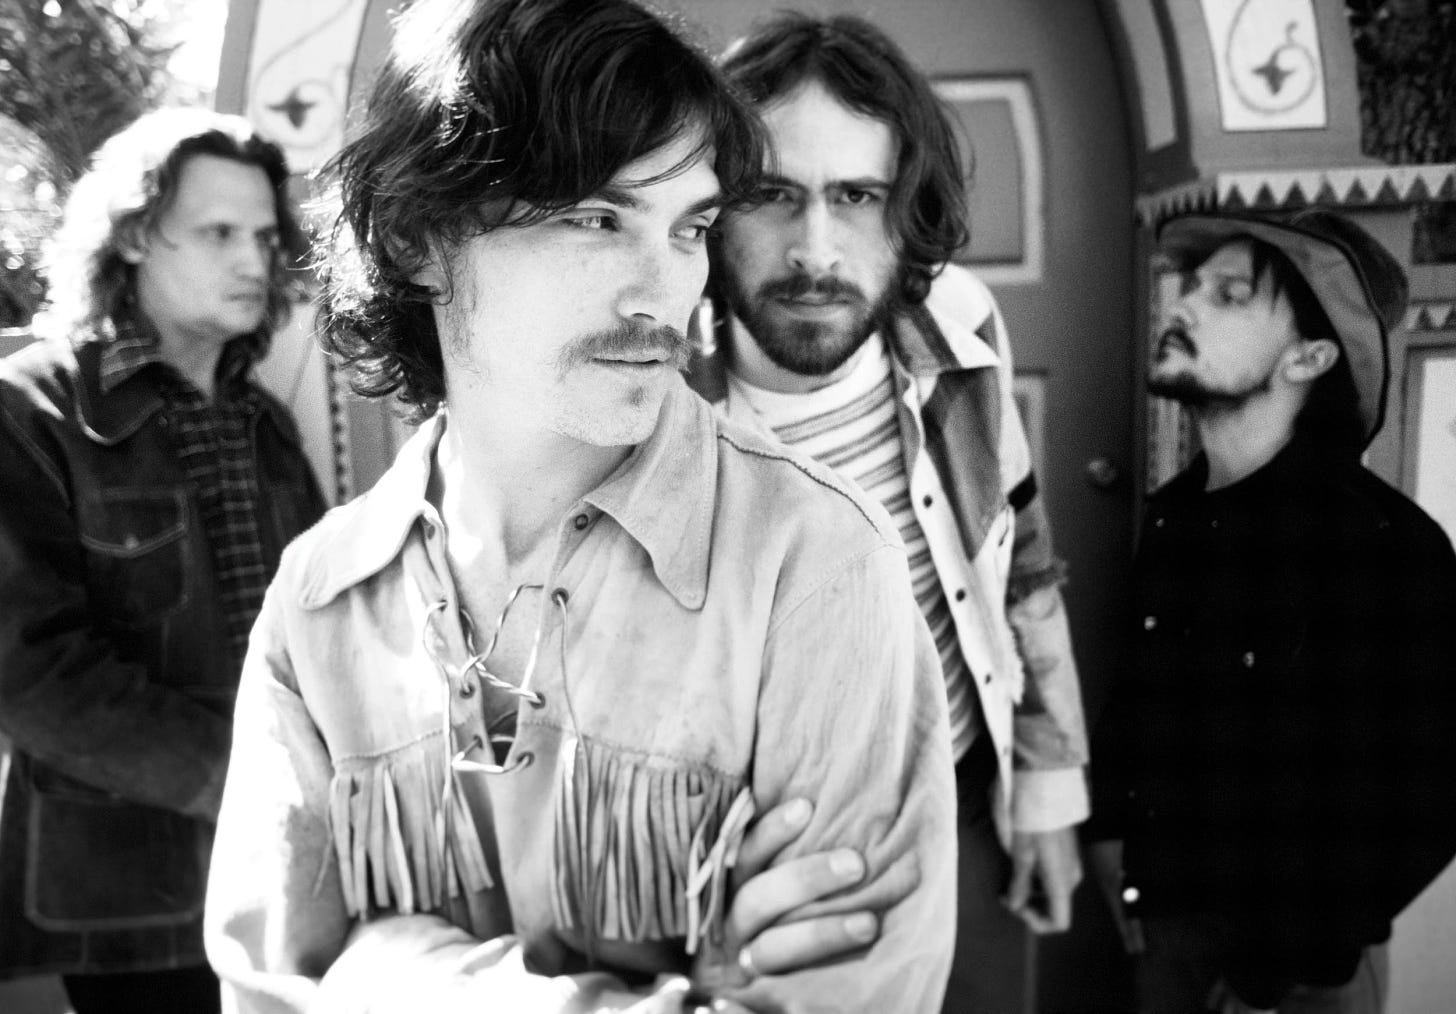 Black and white photo of the band Stillwater from Almost Famous.